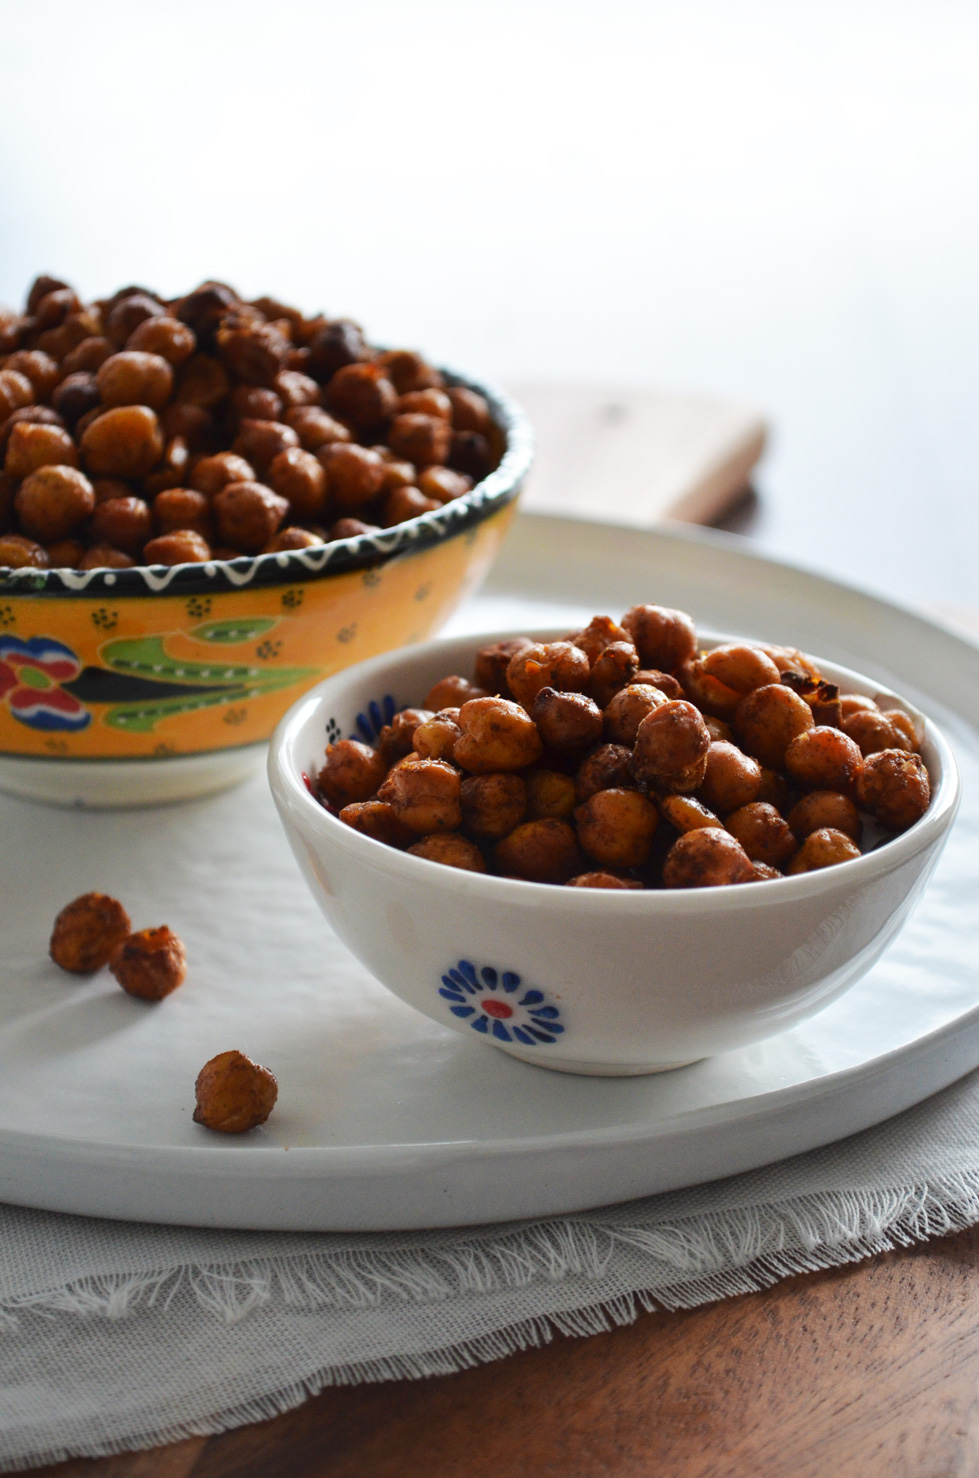 A recipe for Smokey Roasted Chickpeas. Perfectly crunchy and lightly flavored with pimentón (smoked paprika powder), garlic, black pepper and salt. Recipe by That Healthy Kitchen